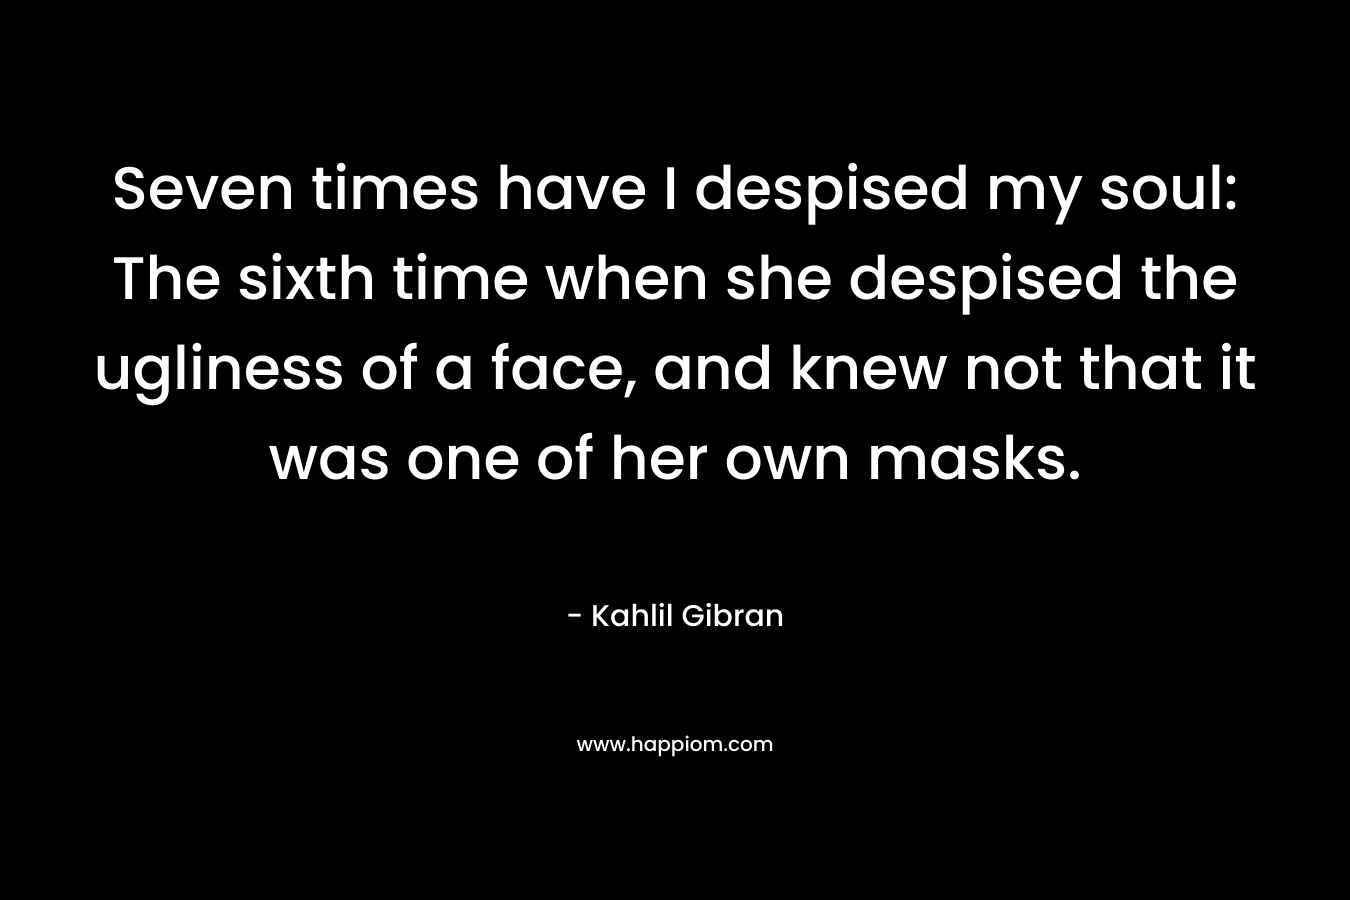 Seven times have I despised my soul: The sixth time when she despised the ugliness of a face, and knew not that it was one of her own masks. – Kahlil Gibran